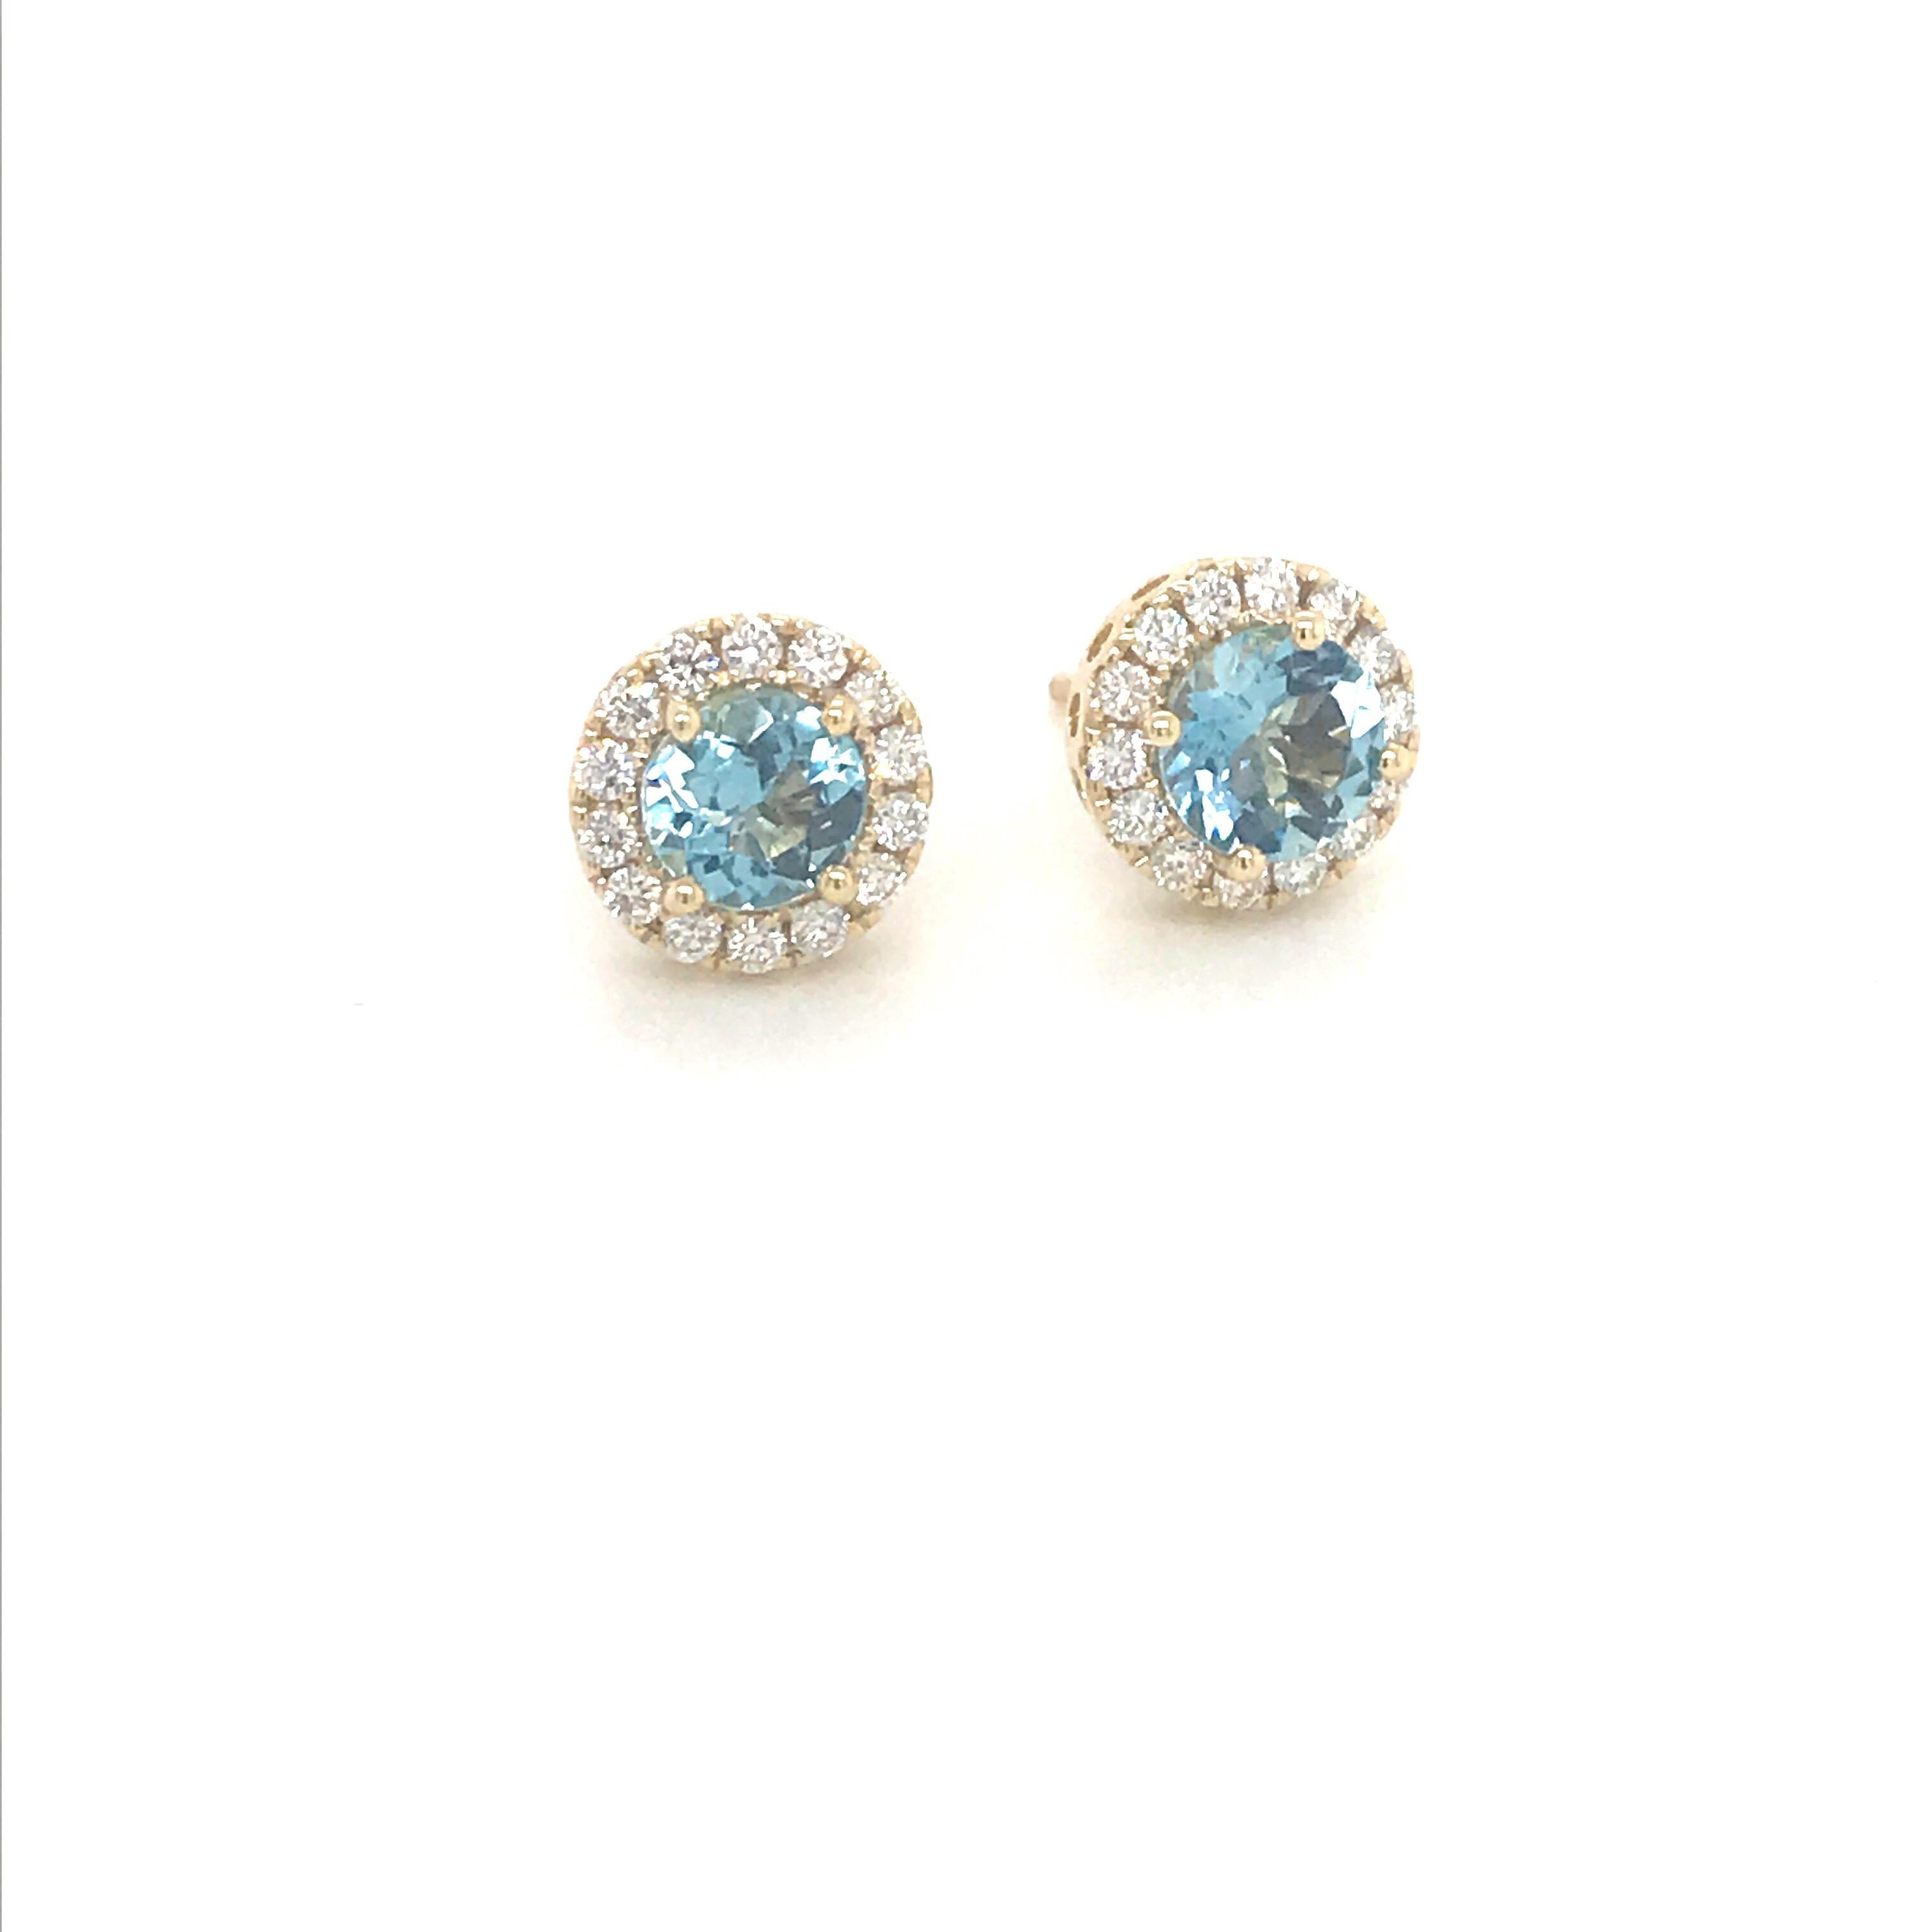 14K Yellow gold earrings featuring one aquamarine weighing 1.33 carats flanked with a diamond halo weighing 0.40 carats.
Color G
Clarity VS-SI

Available in white gold. 